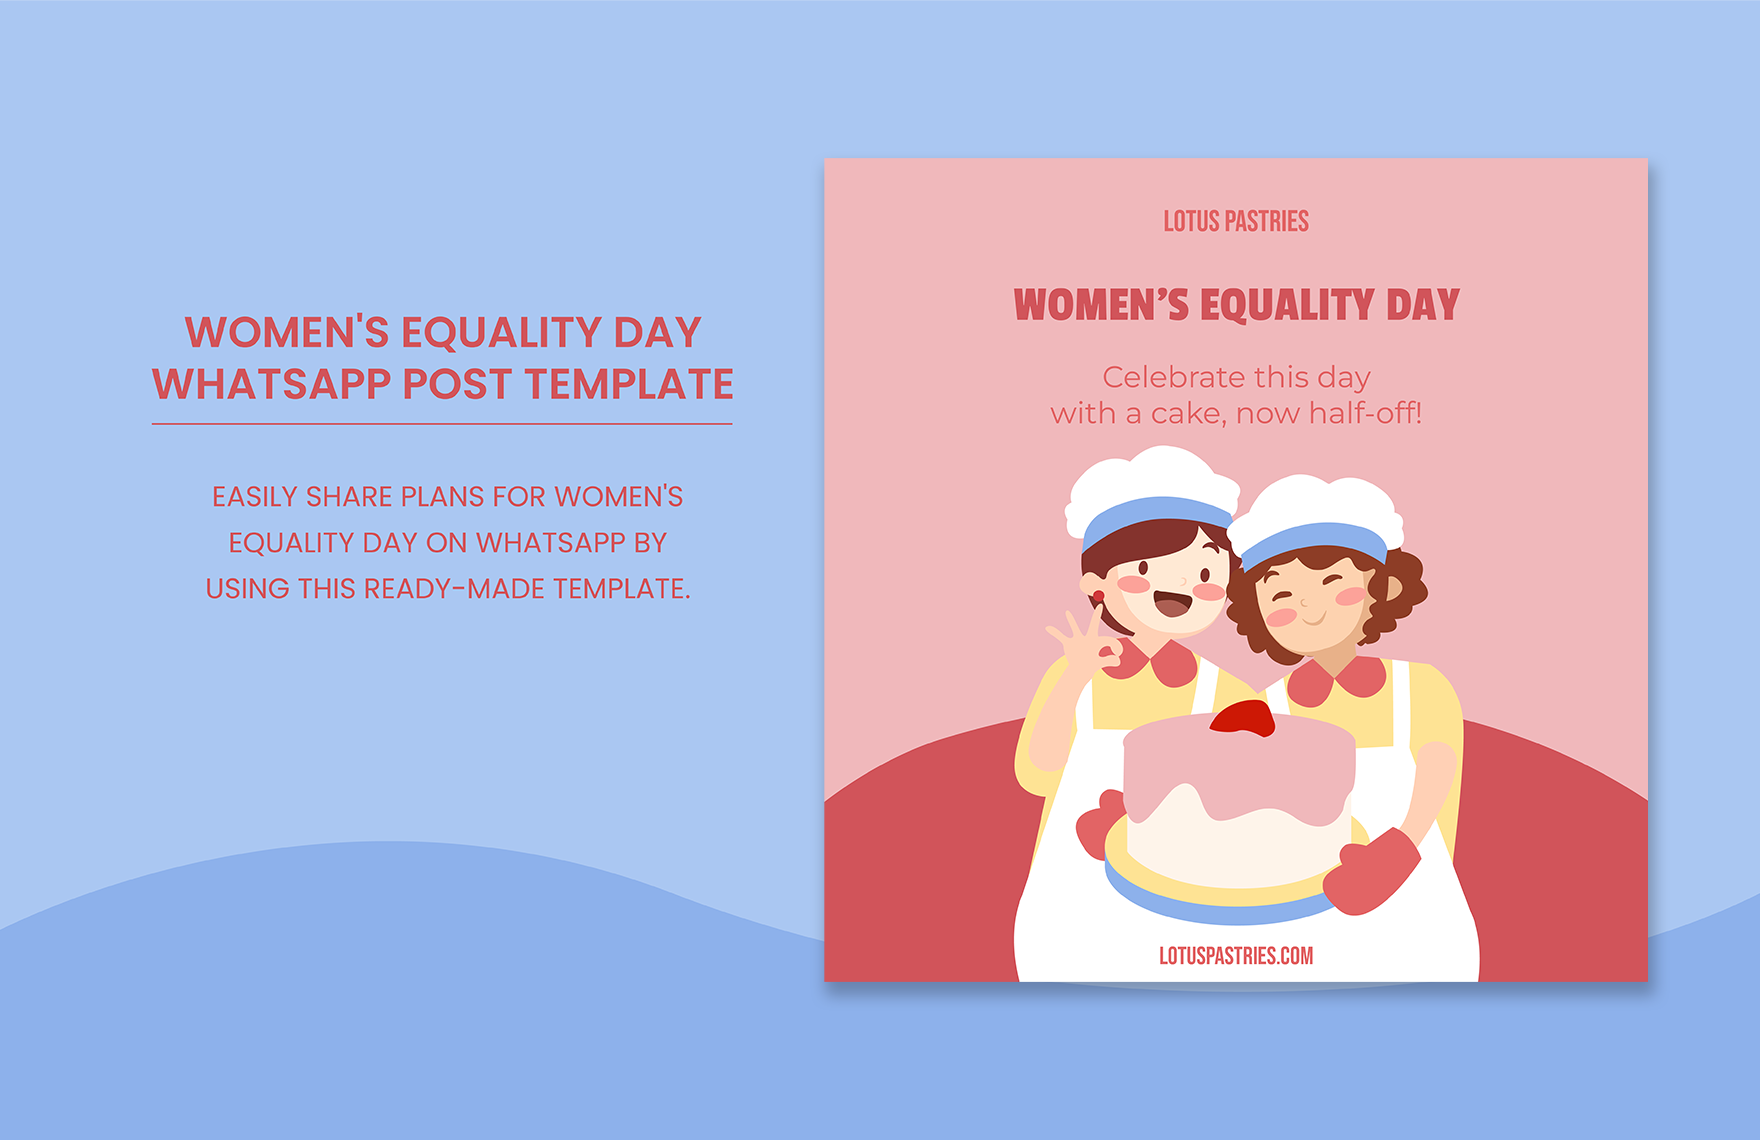 Women's Equality Day WhatsApp Post Template